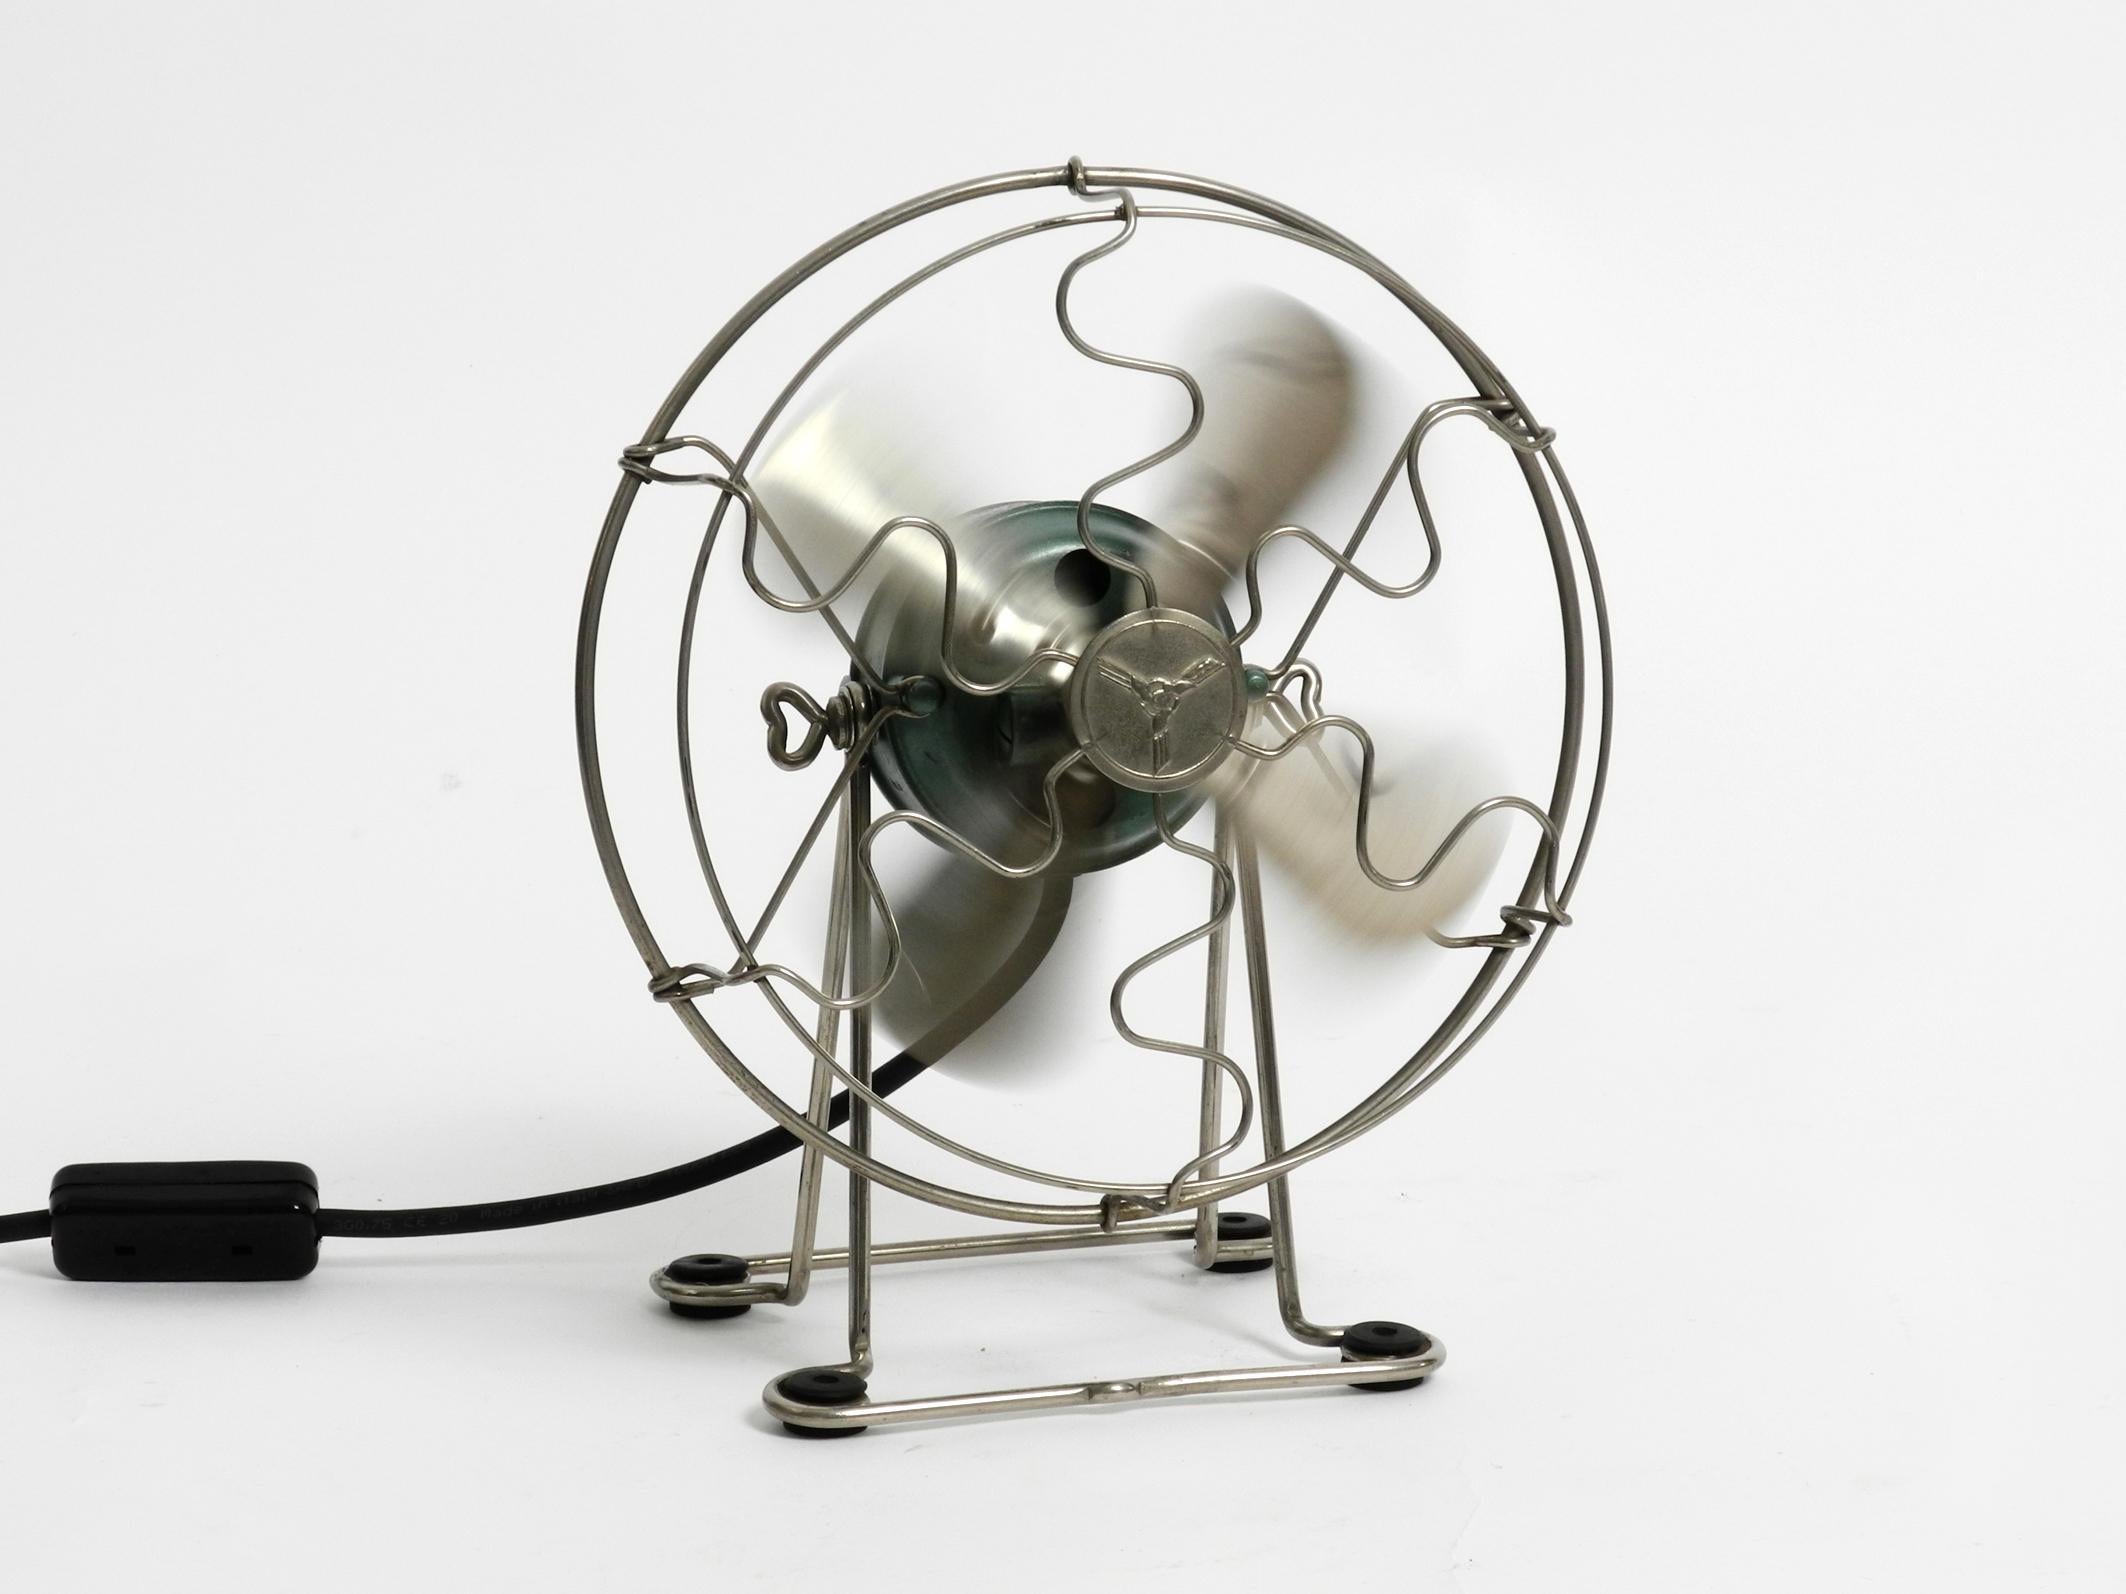 Original Mid Century Industrial Design table fan from Maico.
Type EB20. Made in Germany.
Infinitely adjustable in angle. Original condition and all parts complete.
Housing made of metal, painted green.
Chrome-plated metal base and protective